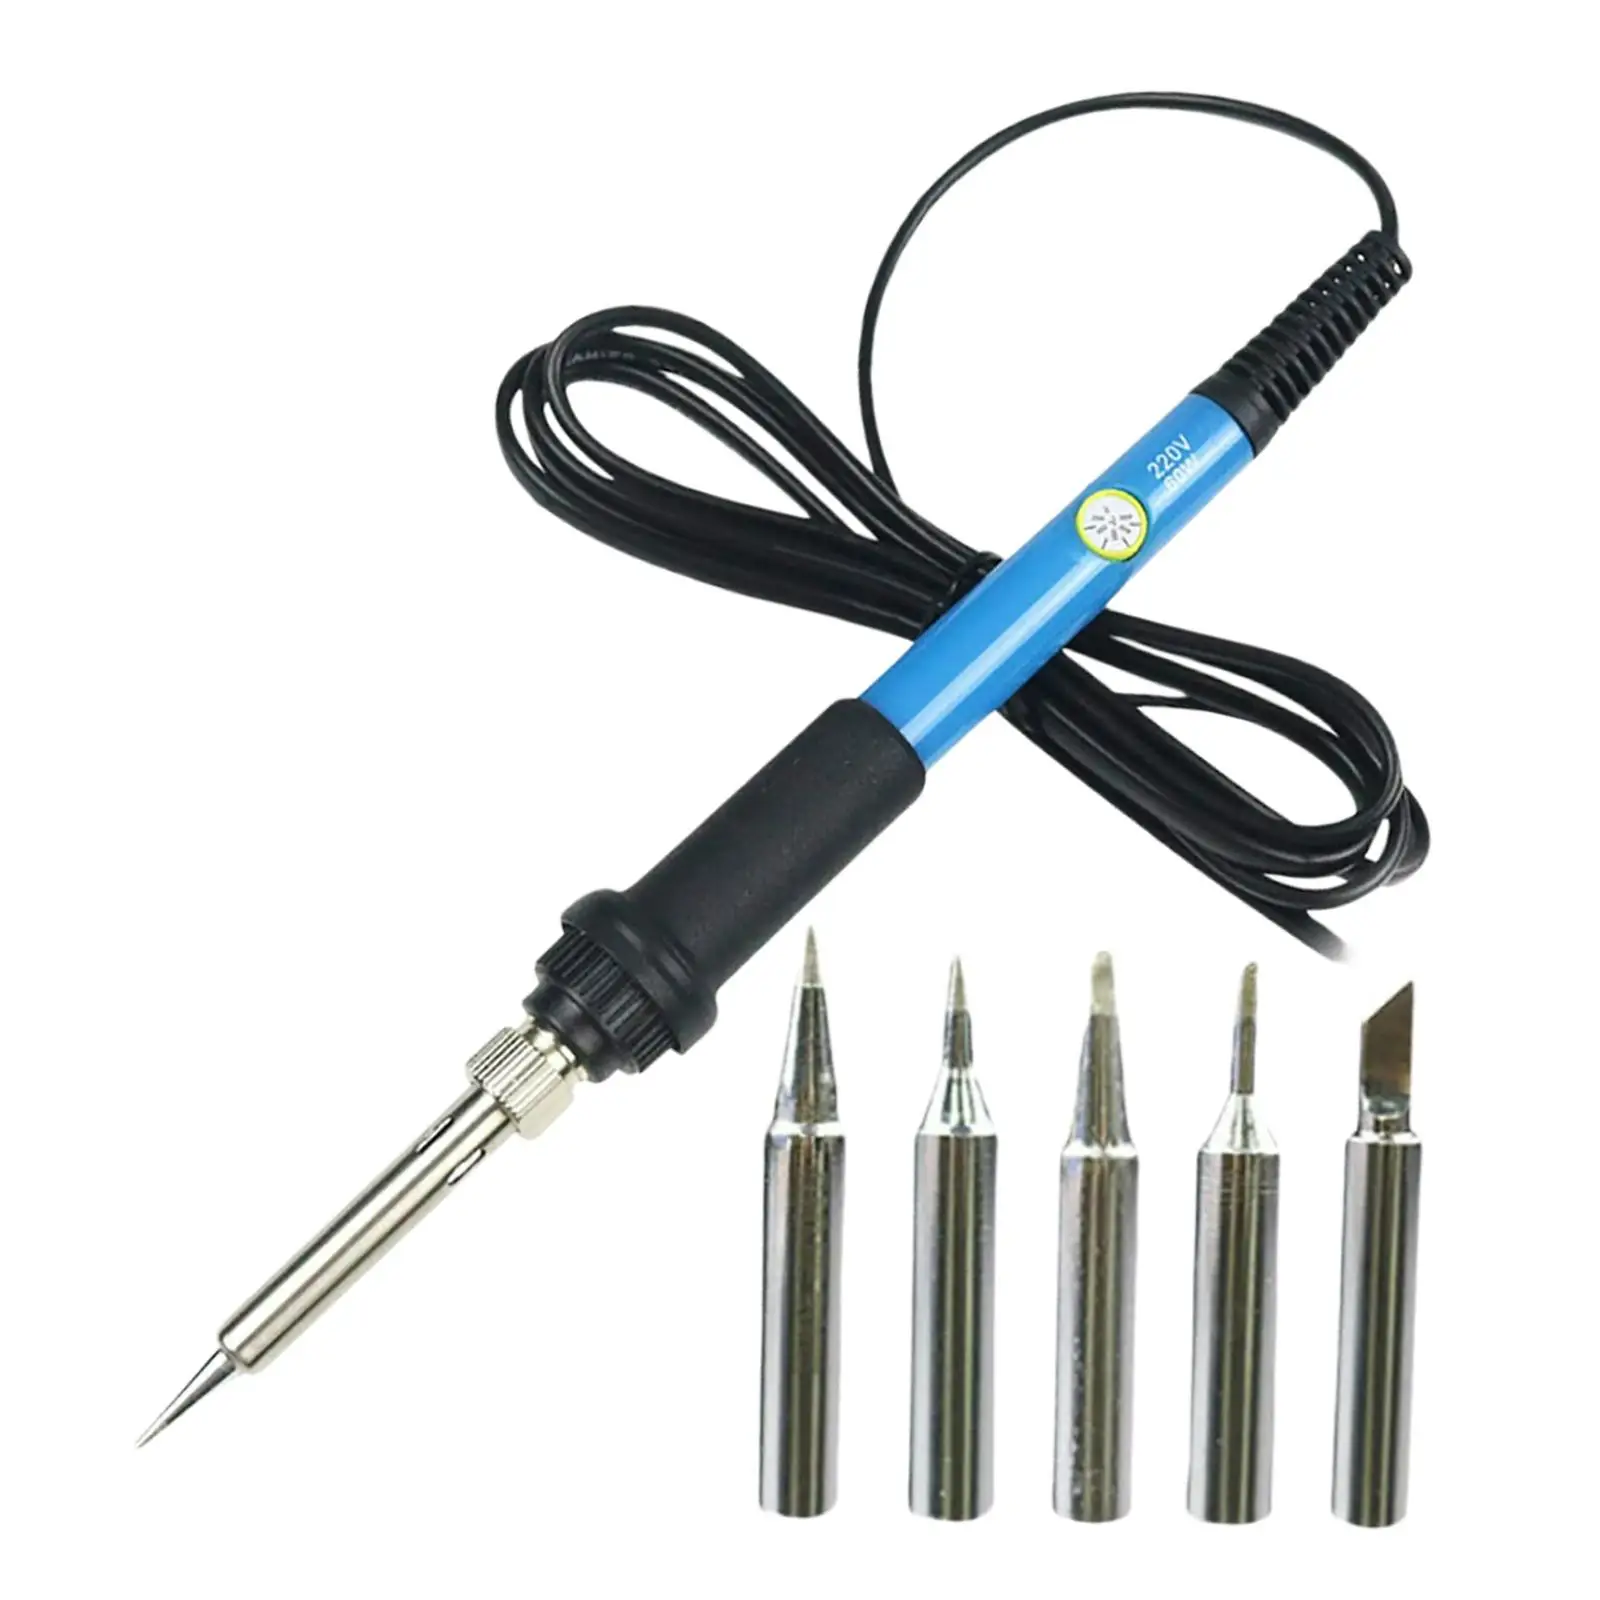 Professional Temperature Soldering Iron Set Electric Soldering Iron Kit for Home